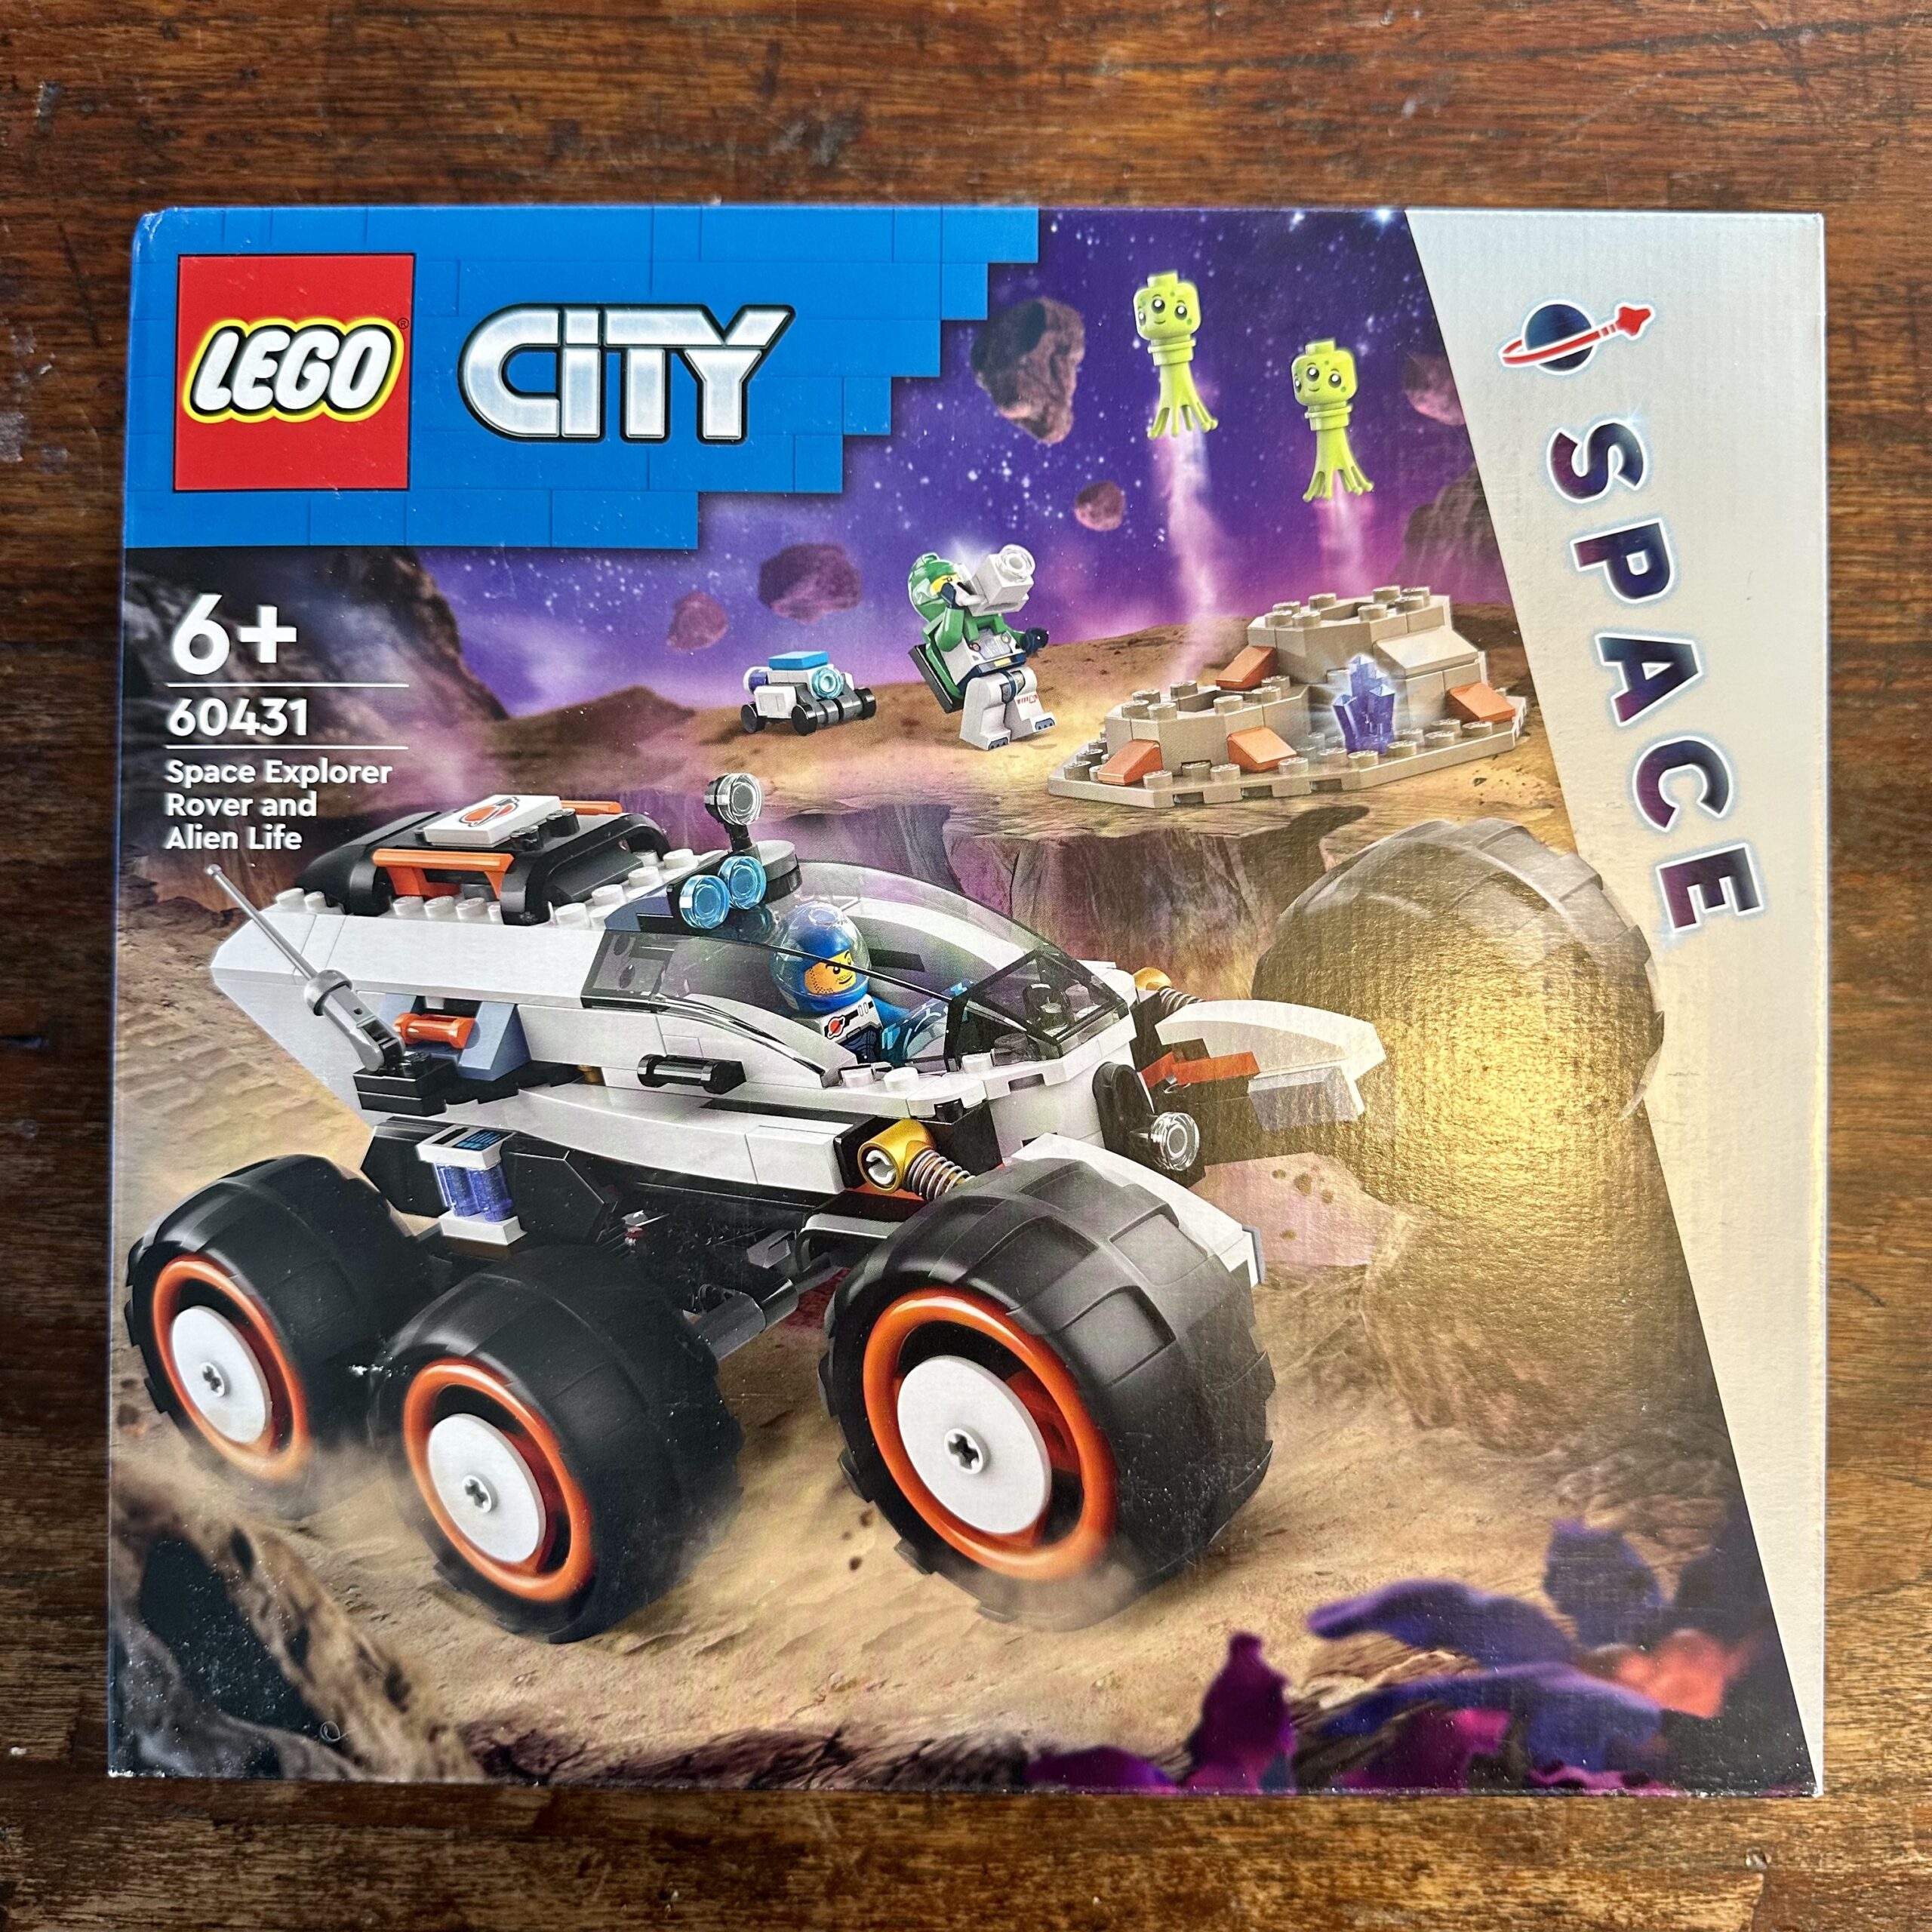 Box for LEGO City Space set 60431 Space Explorer Rover and Alien Life. Box depicts a 6-wheeled rover in white and black with orangish-red highlights piloted by a blue astronaut across alien terrain. In the background a green astronaut photographs some green aliens launching from a pair of dark tan craters. A small wheeled robot sits nearby.